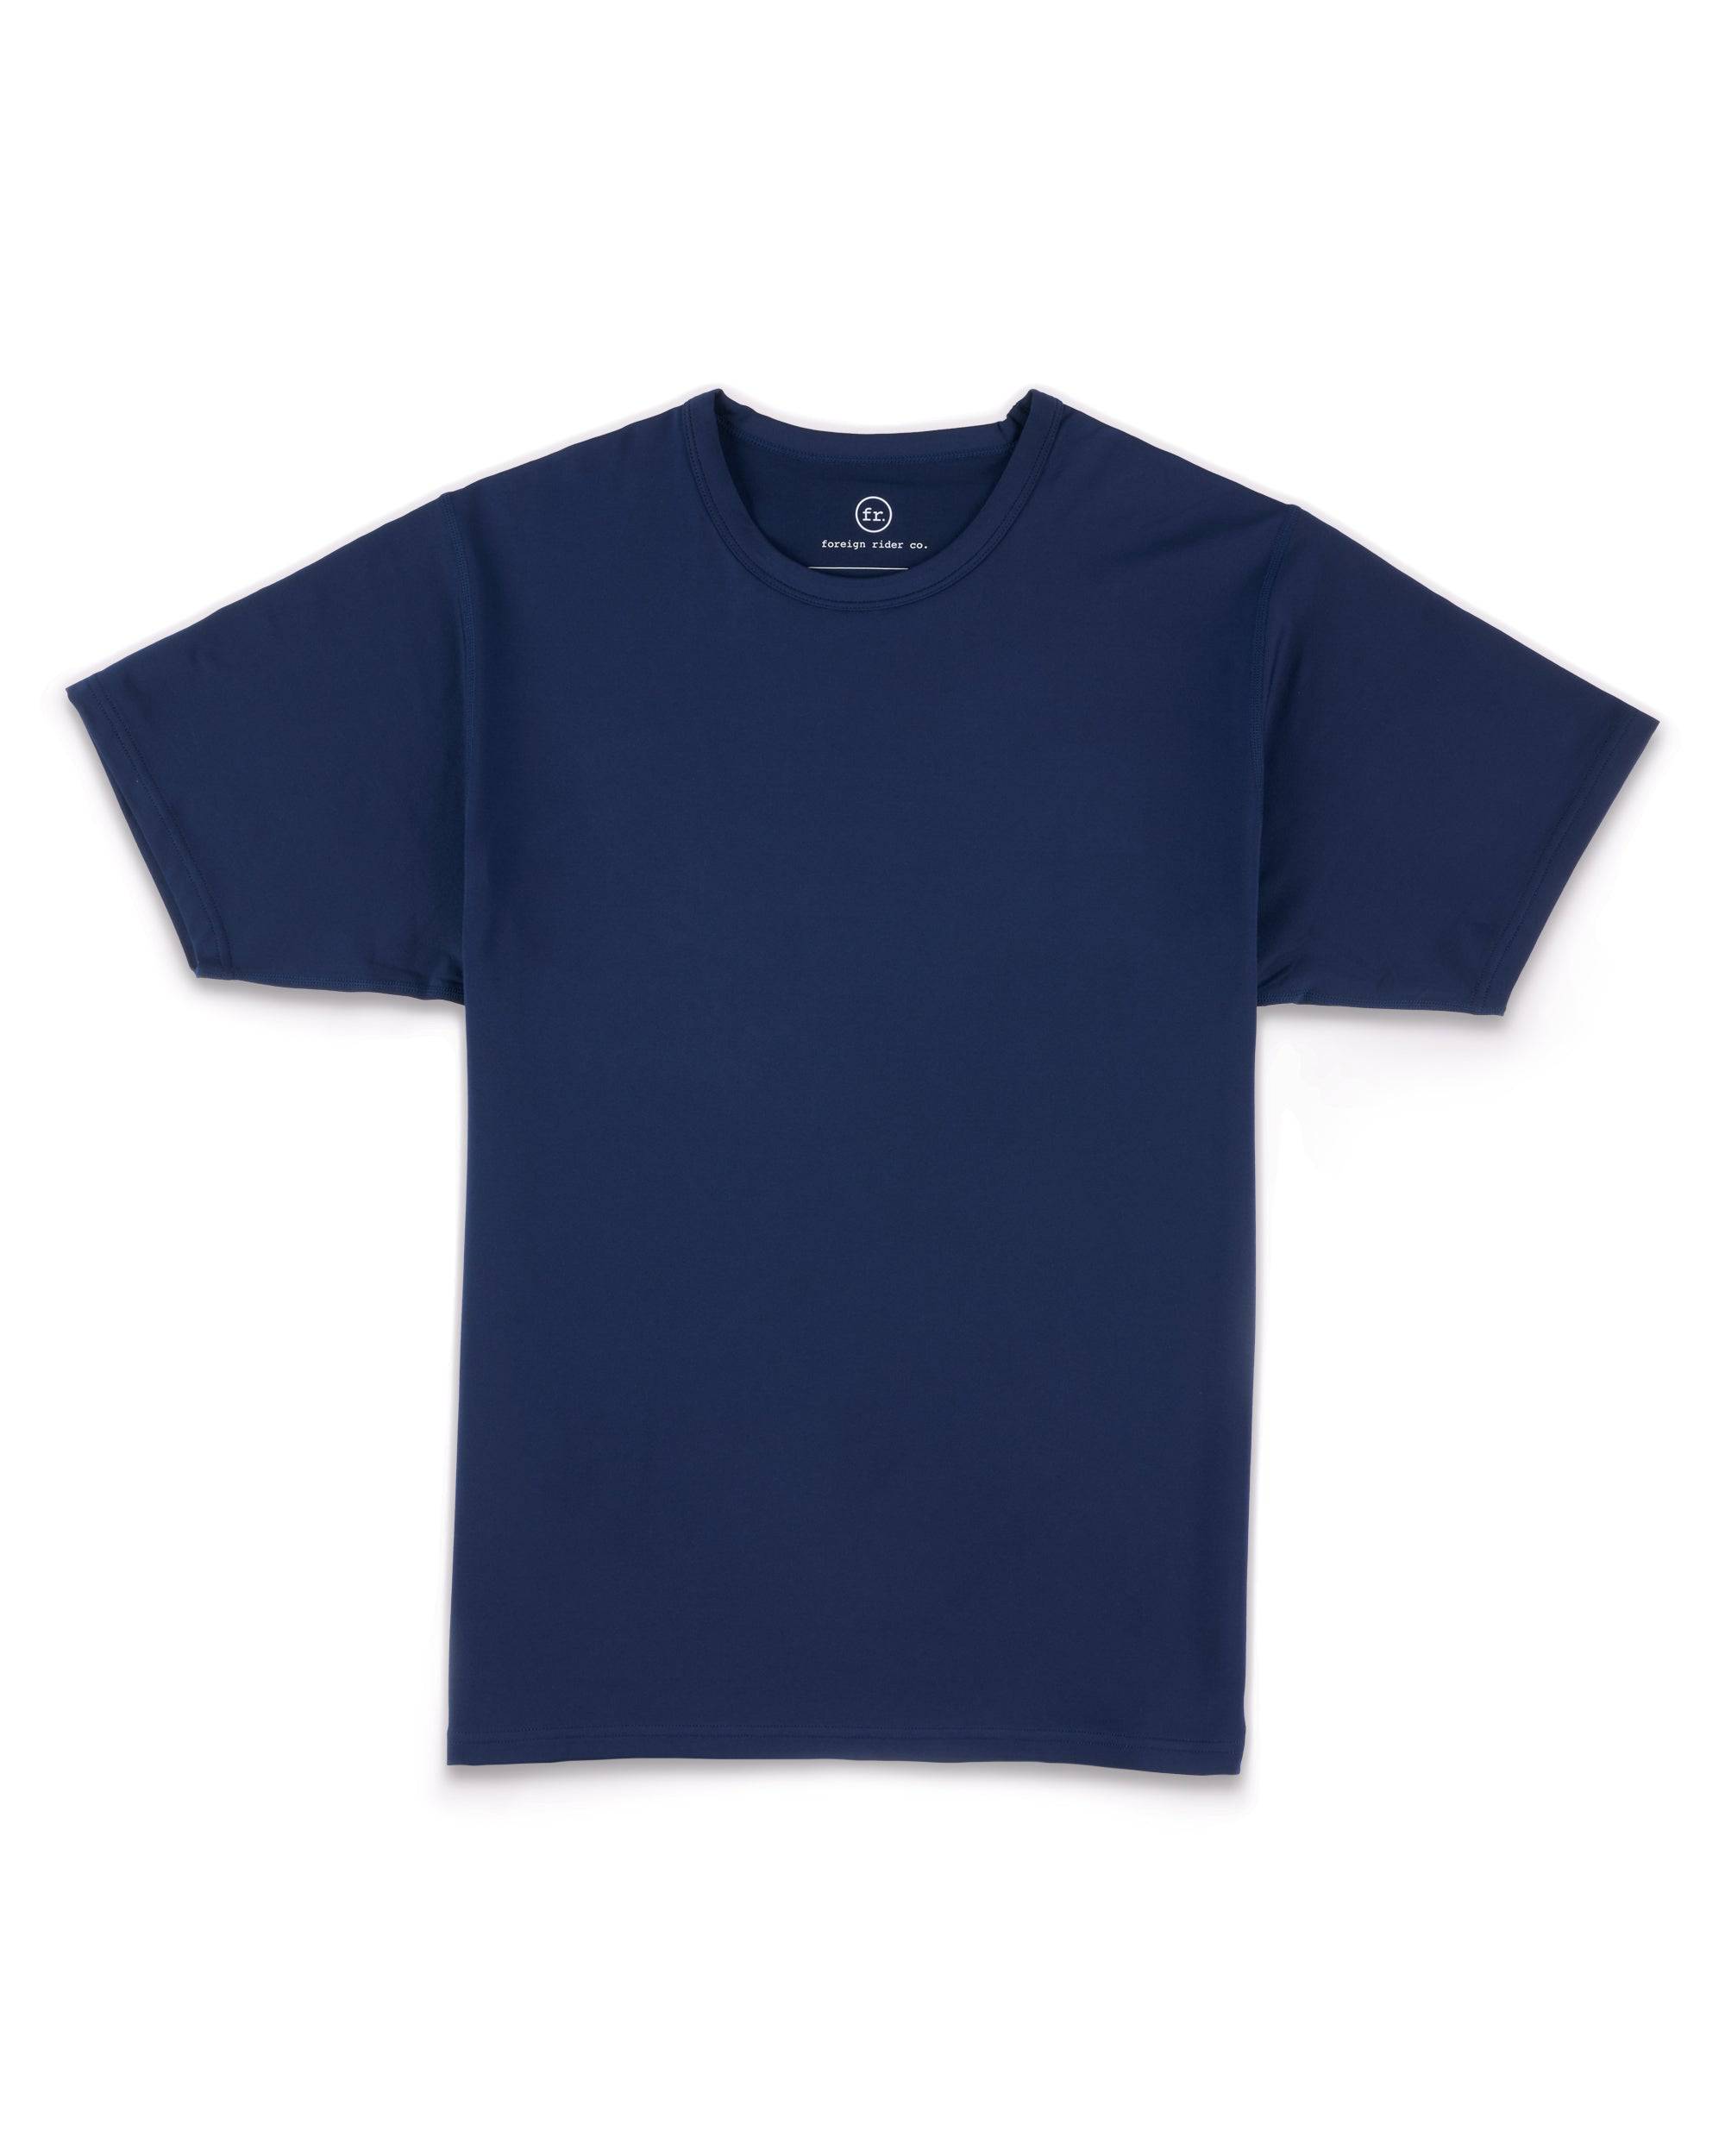 Performance SS T-Shirt Navy - Foreign Rider Co.